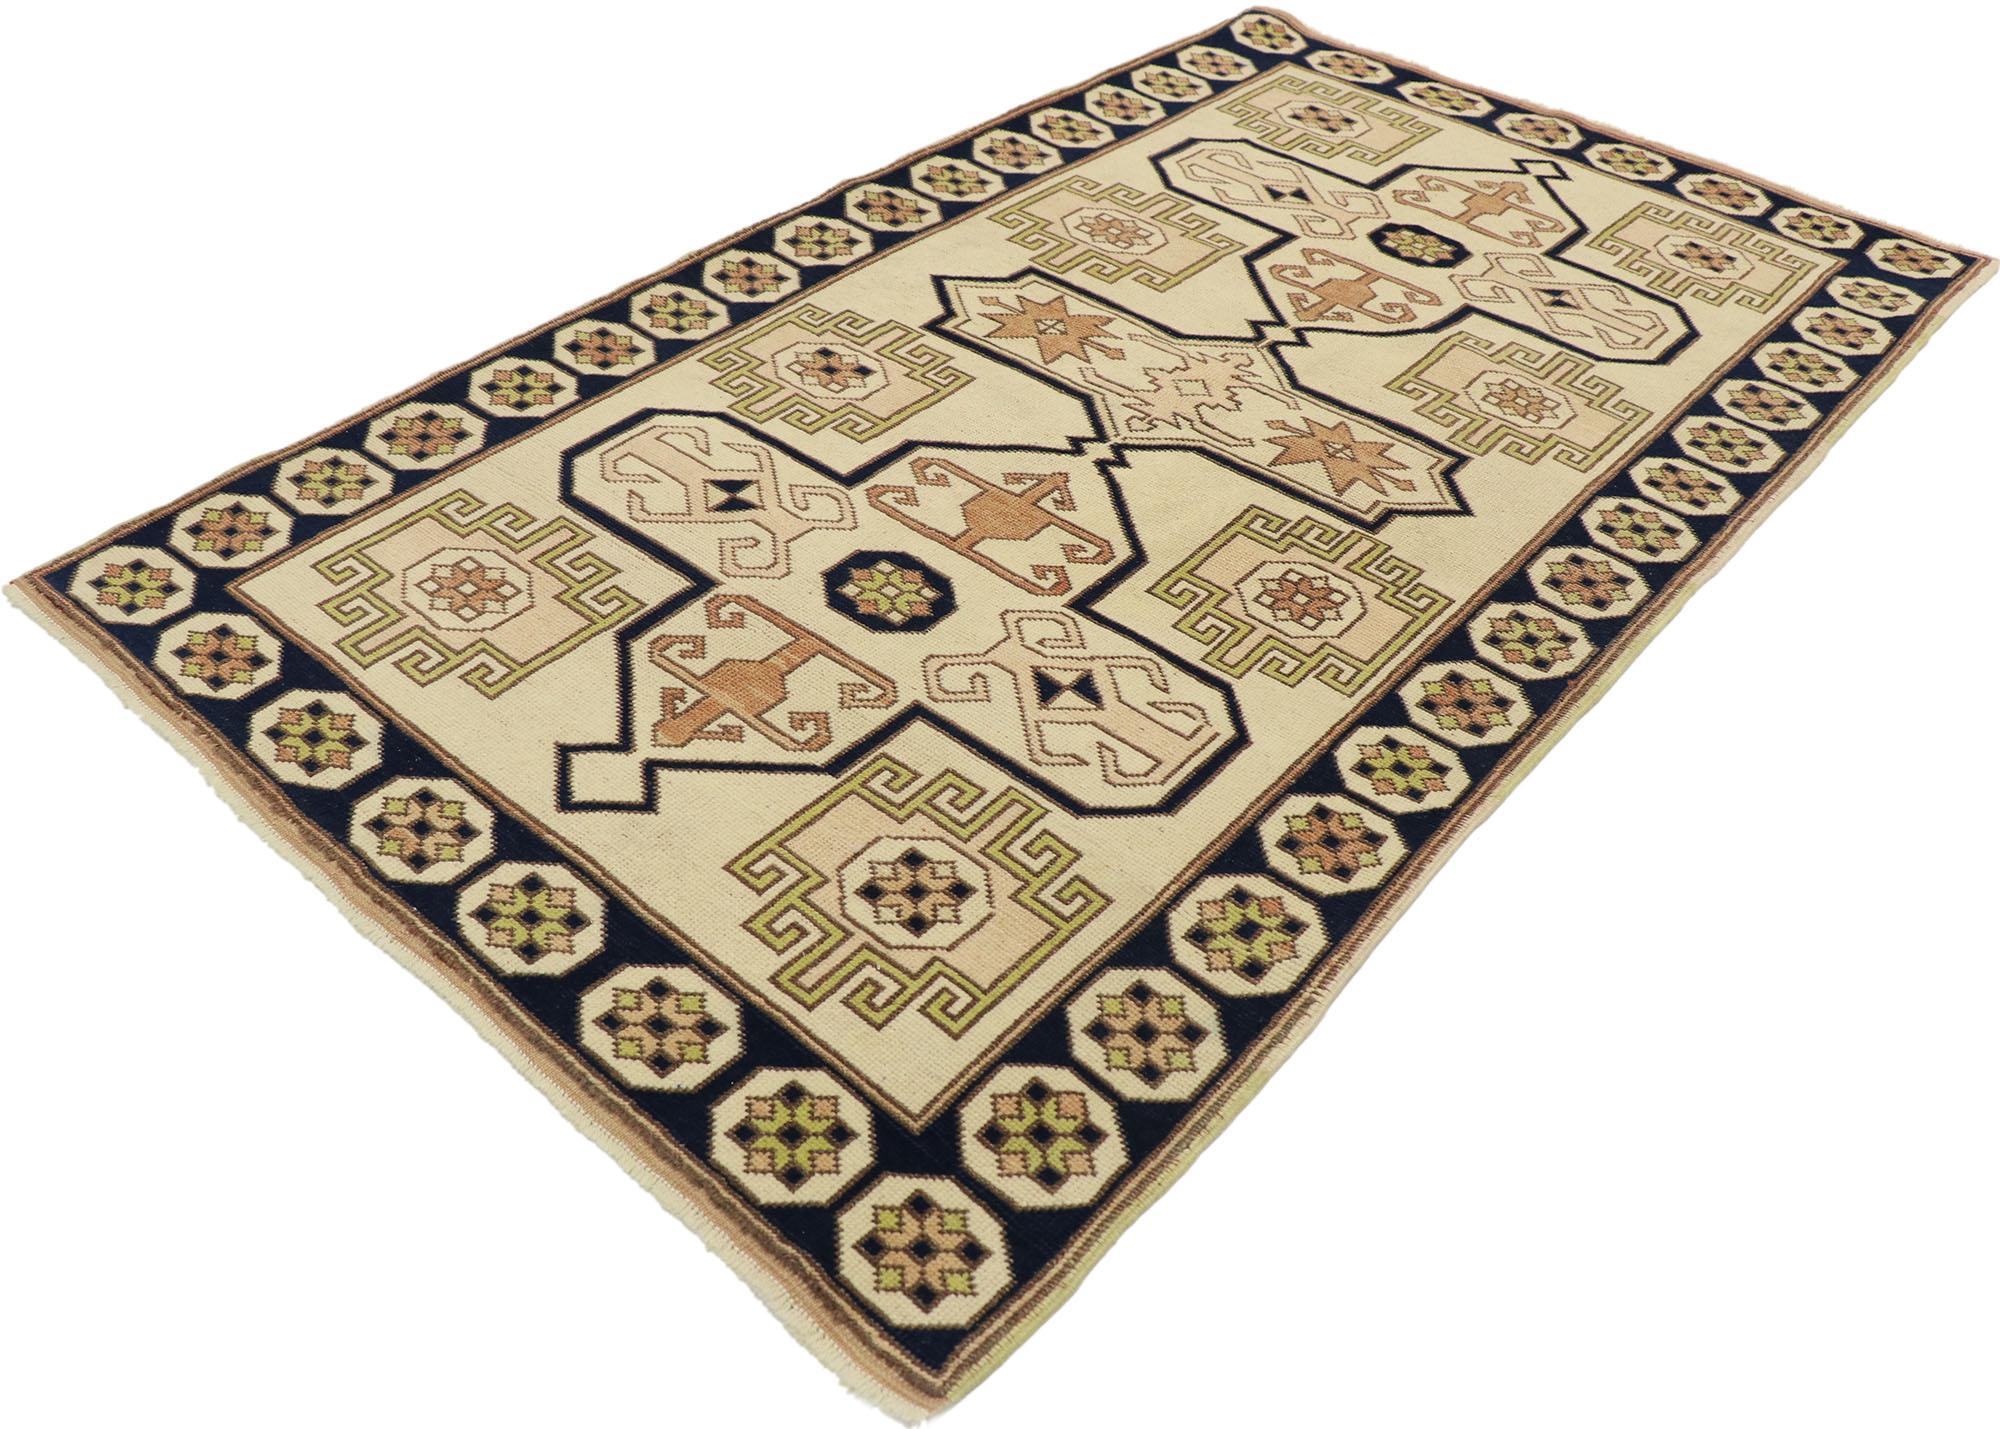 53183, vintage Turkish Oushak rug with Neutral Navajo style. With its bold expressive design, incredible detail and texture, this hand knotted wool vintage Turkish Oushak rug is a captivating vision of woven beauty showcasing neutral Navajo style.